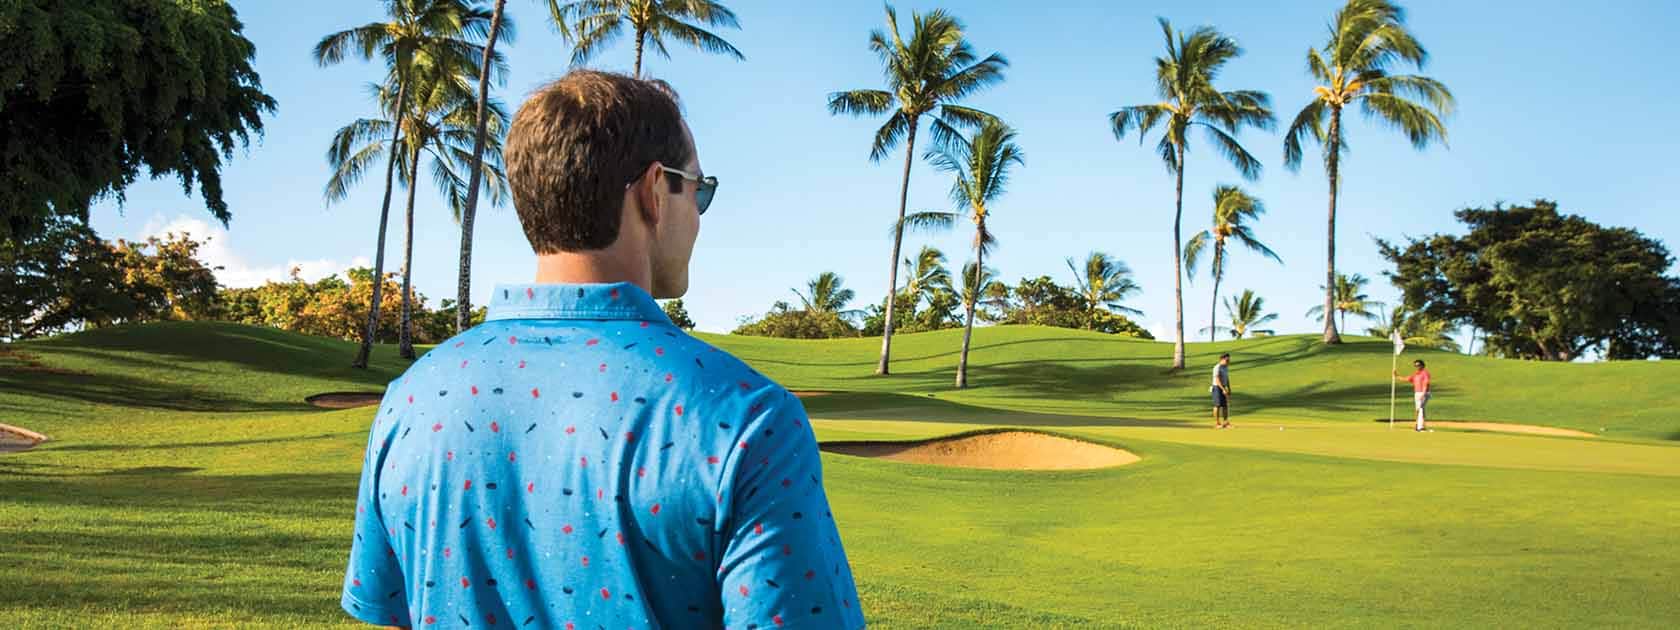 man with blue textured dress shirt standing on golf course with palm trees looking at other golfers